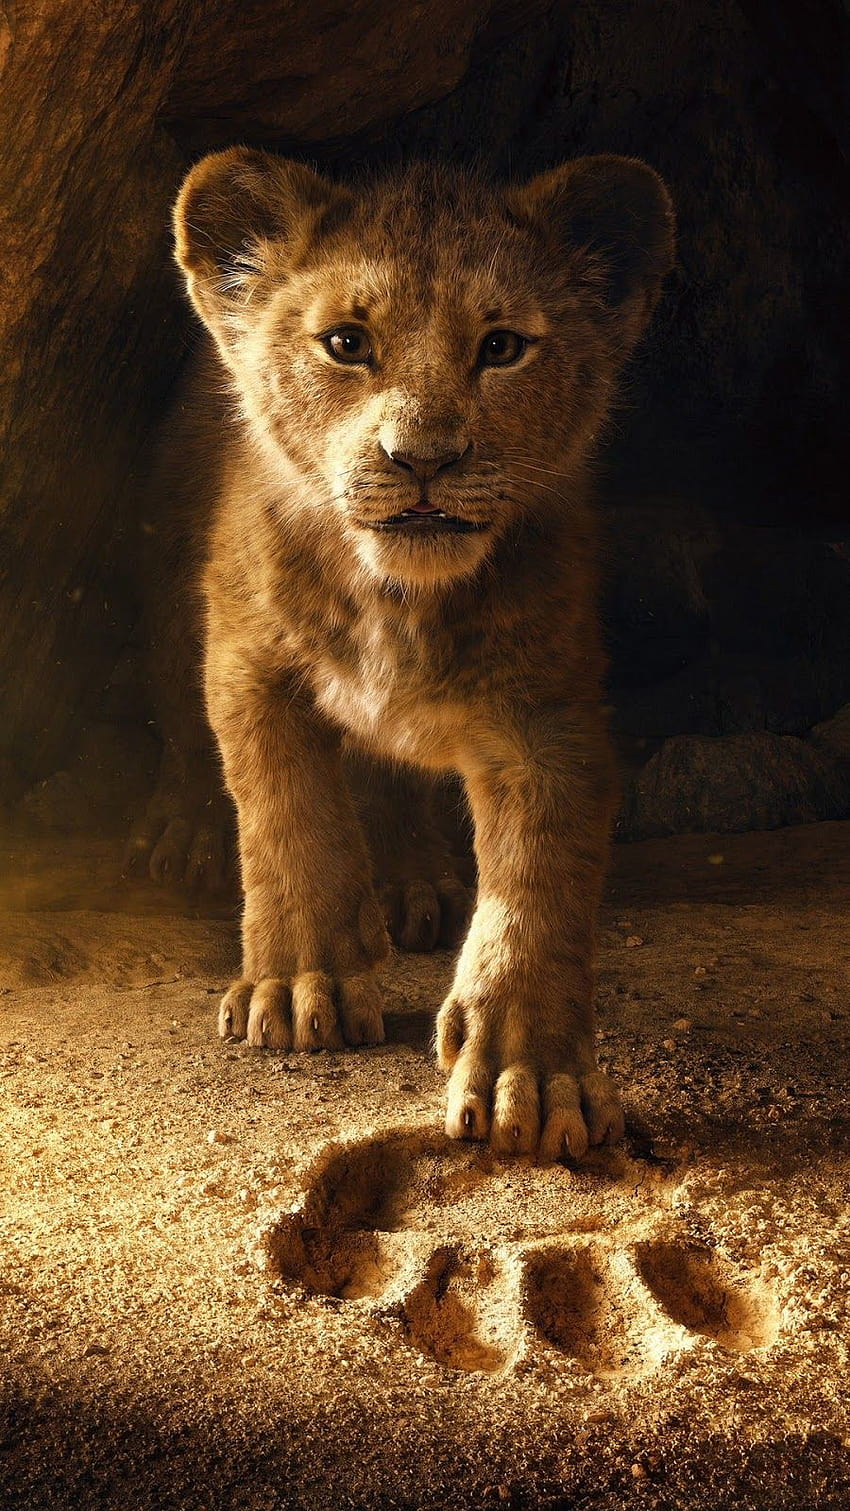 The Lion King 2019 for mobile, lion amoled HD phone wallpaper